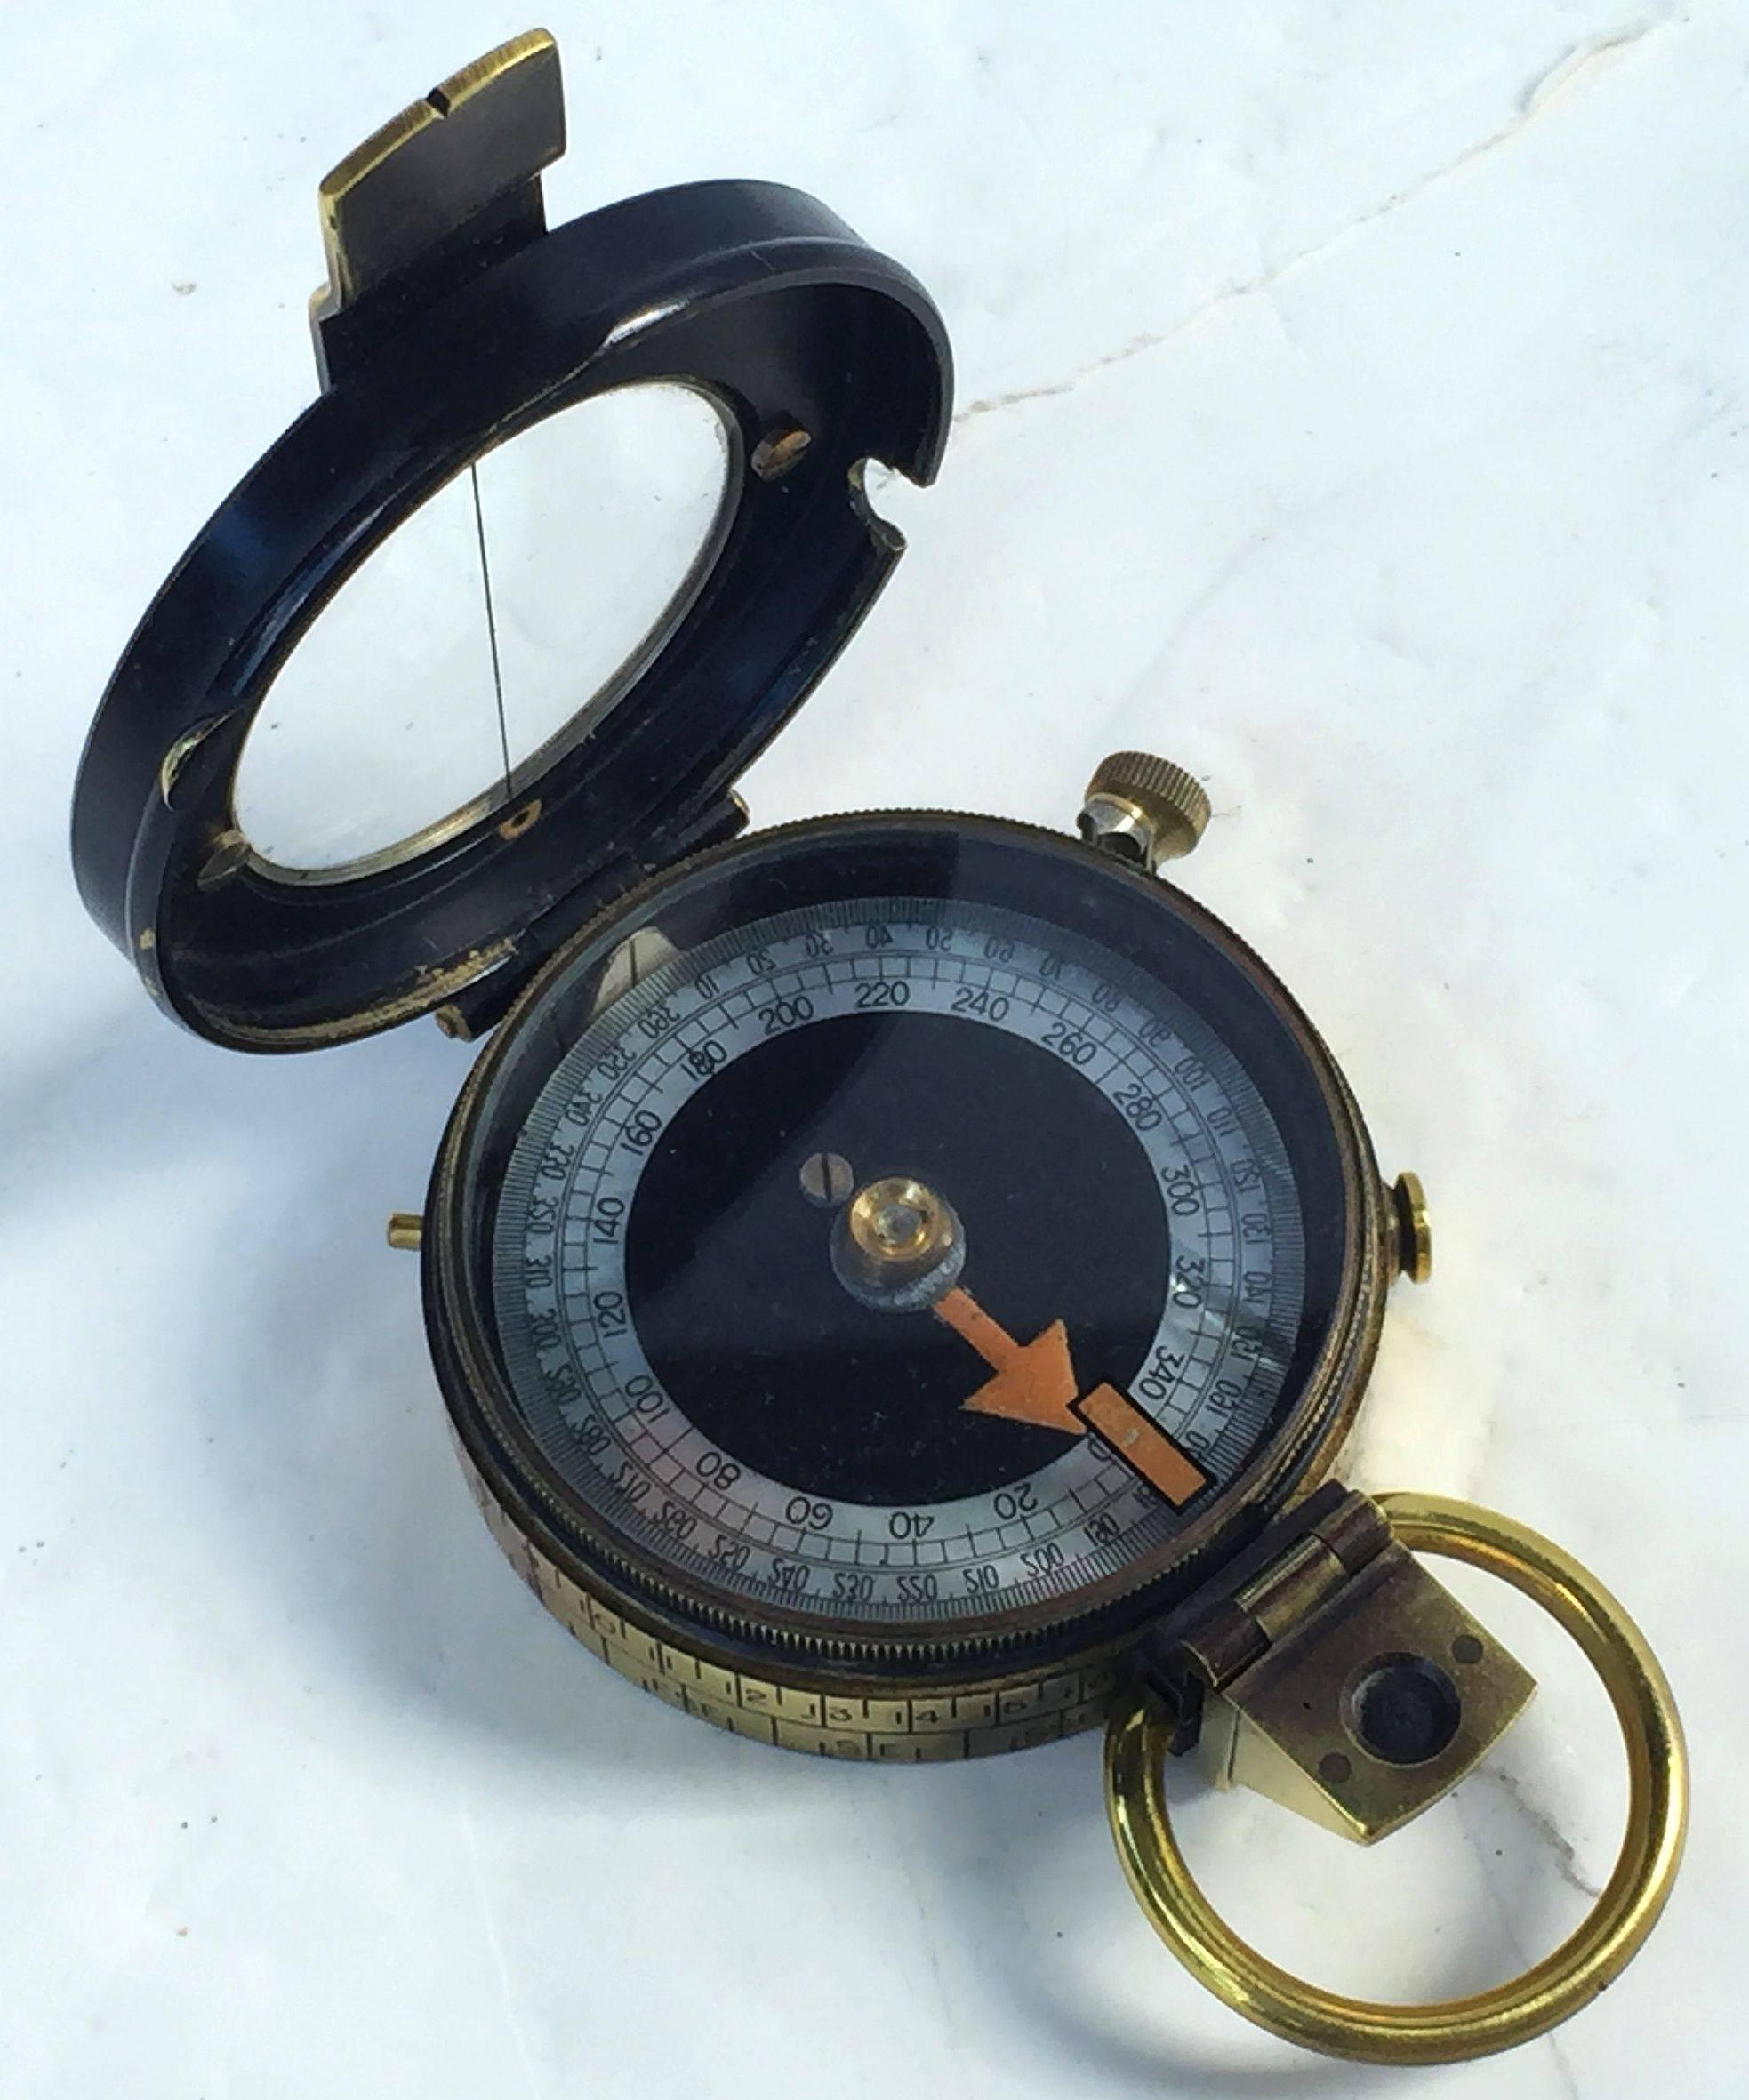 A working British military marching or sighting compass of heavy brass in original leather case from World War I.
Known as a Verner's pattern VIII prismatic compass, with radium and mother-of-pearl dial.

Back with arrow mark denoting use by the